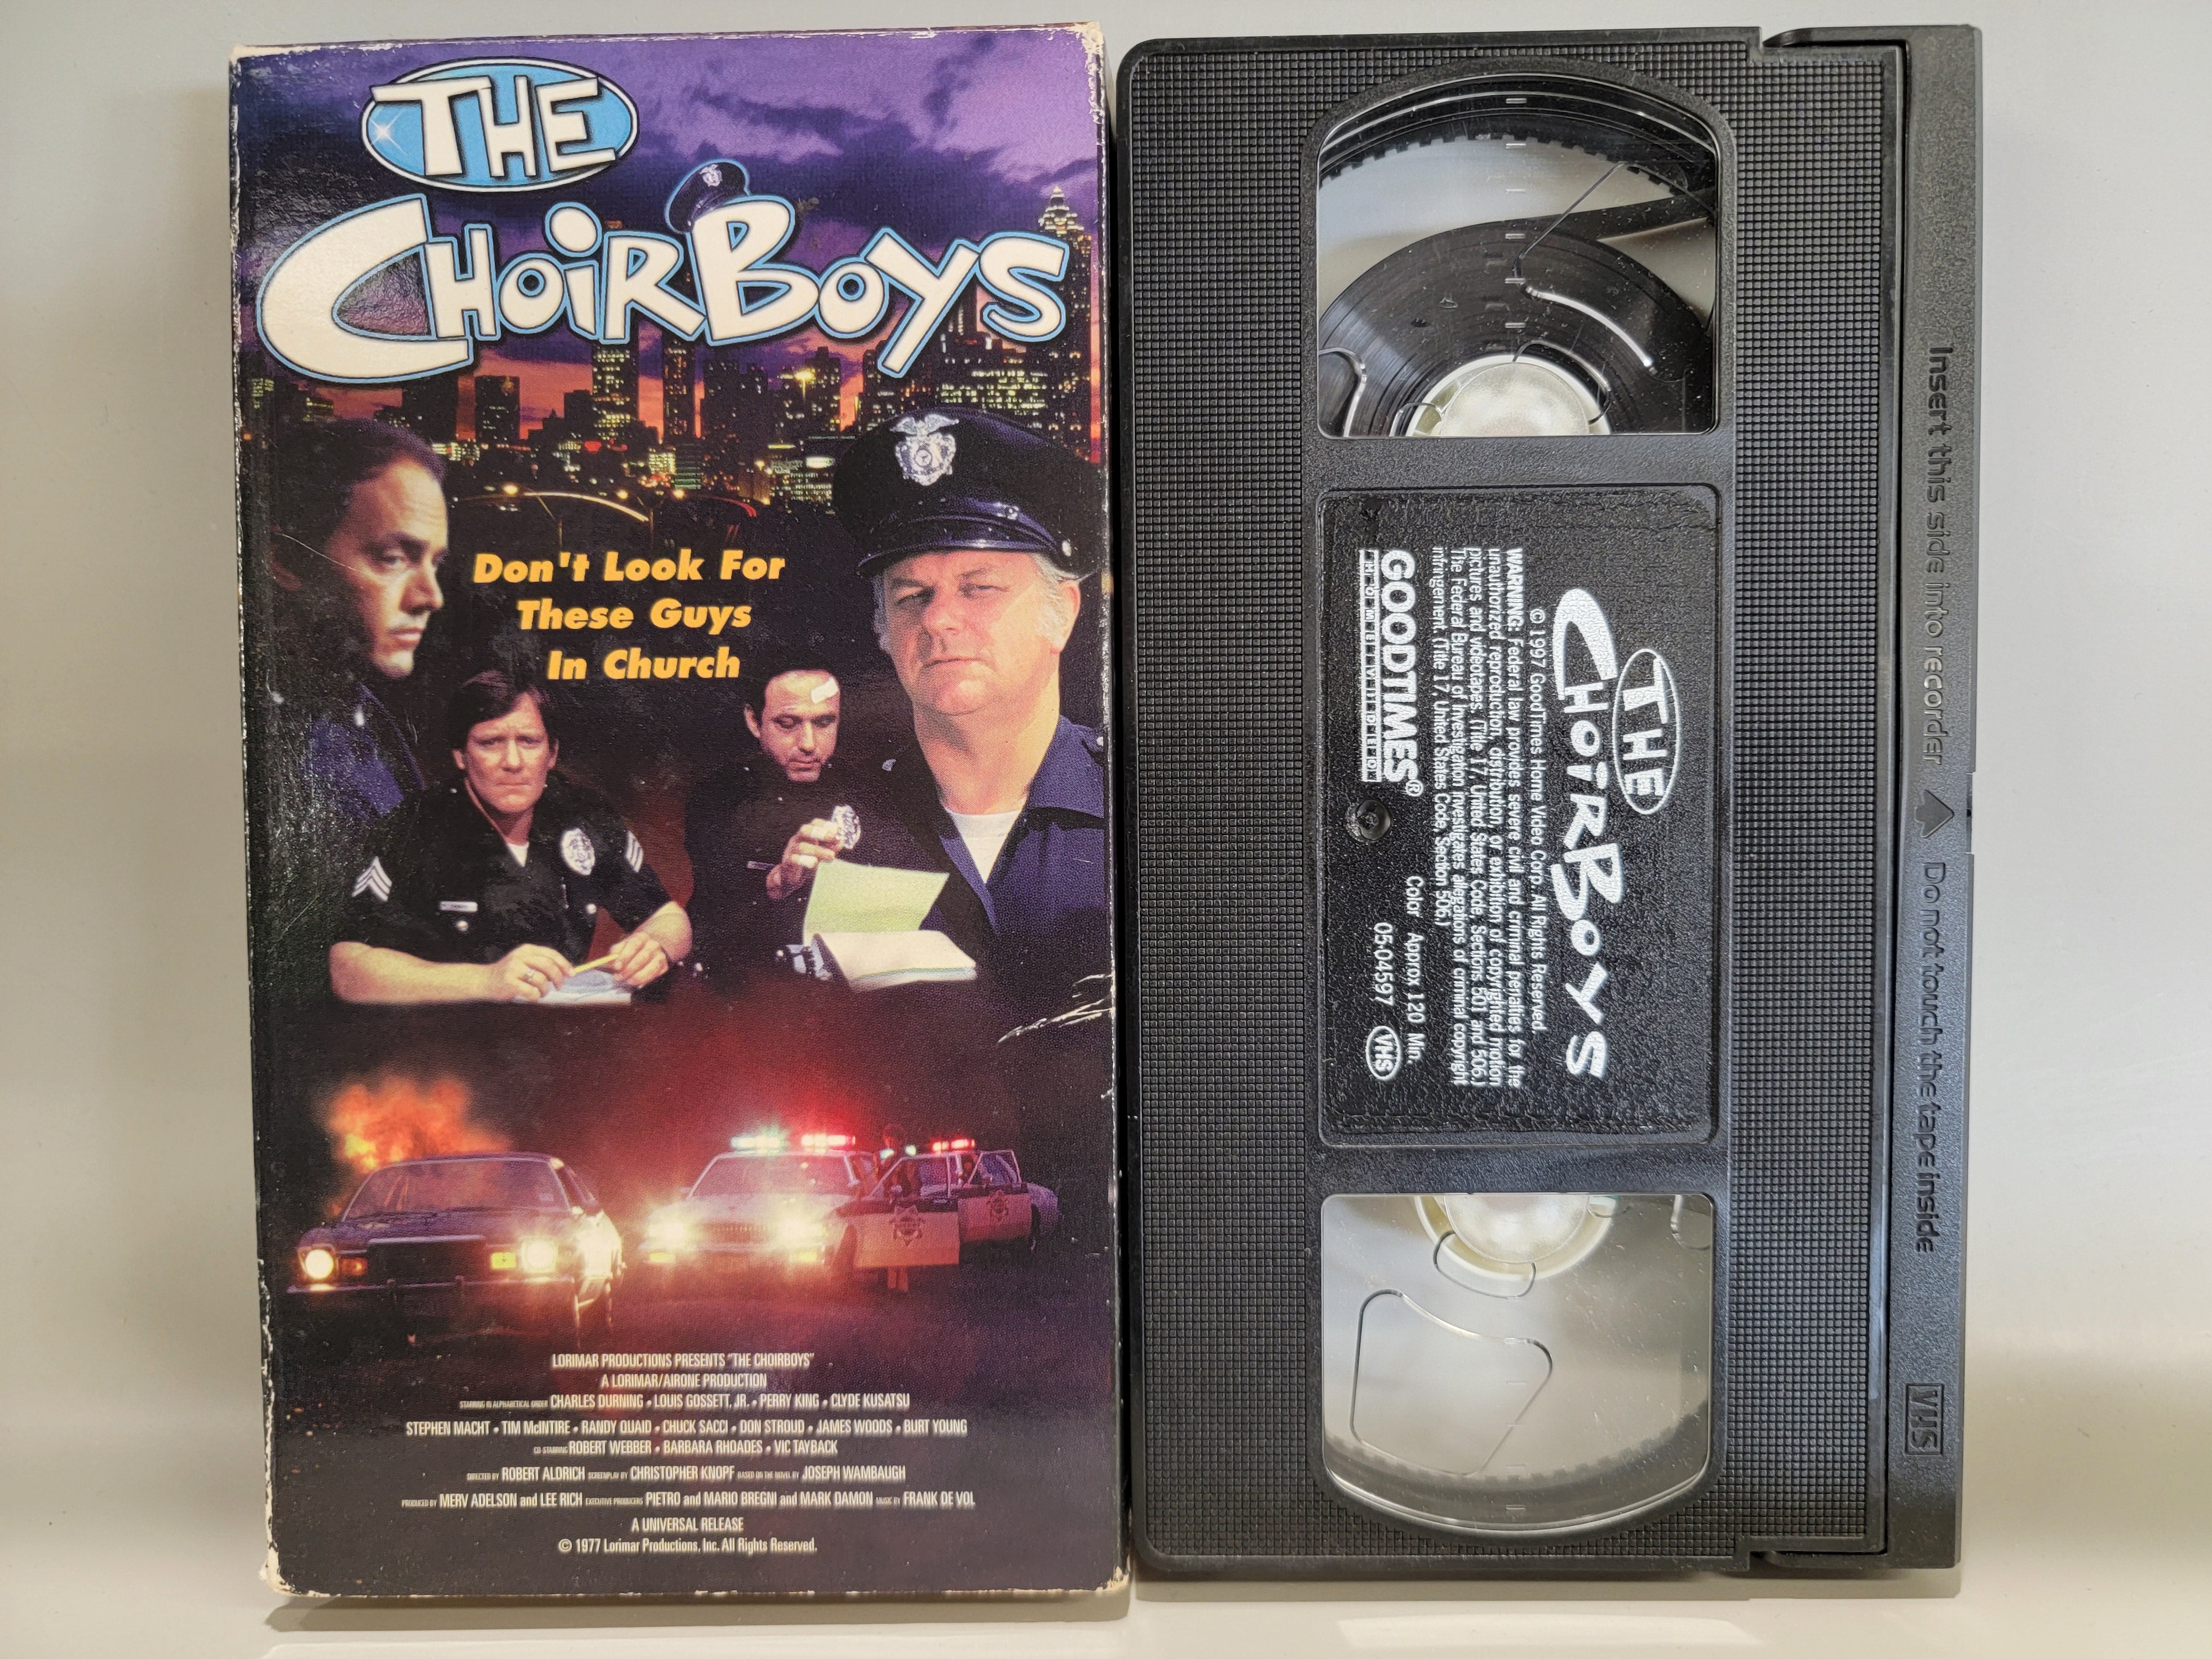 THE CHOIRBOYS VHS [USED]